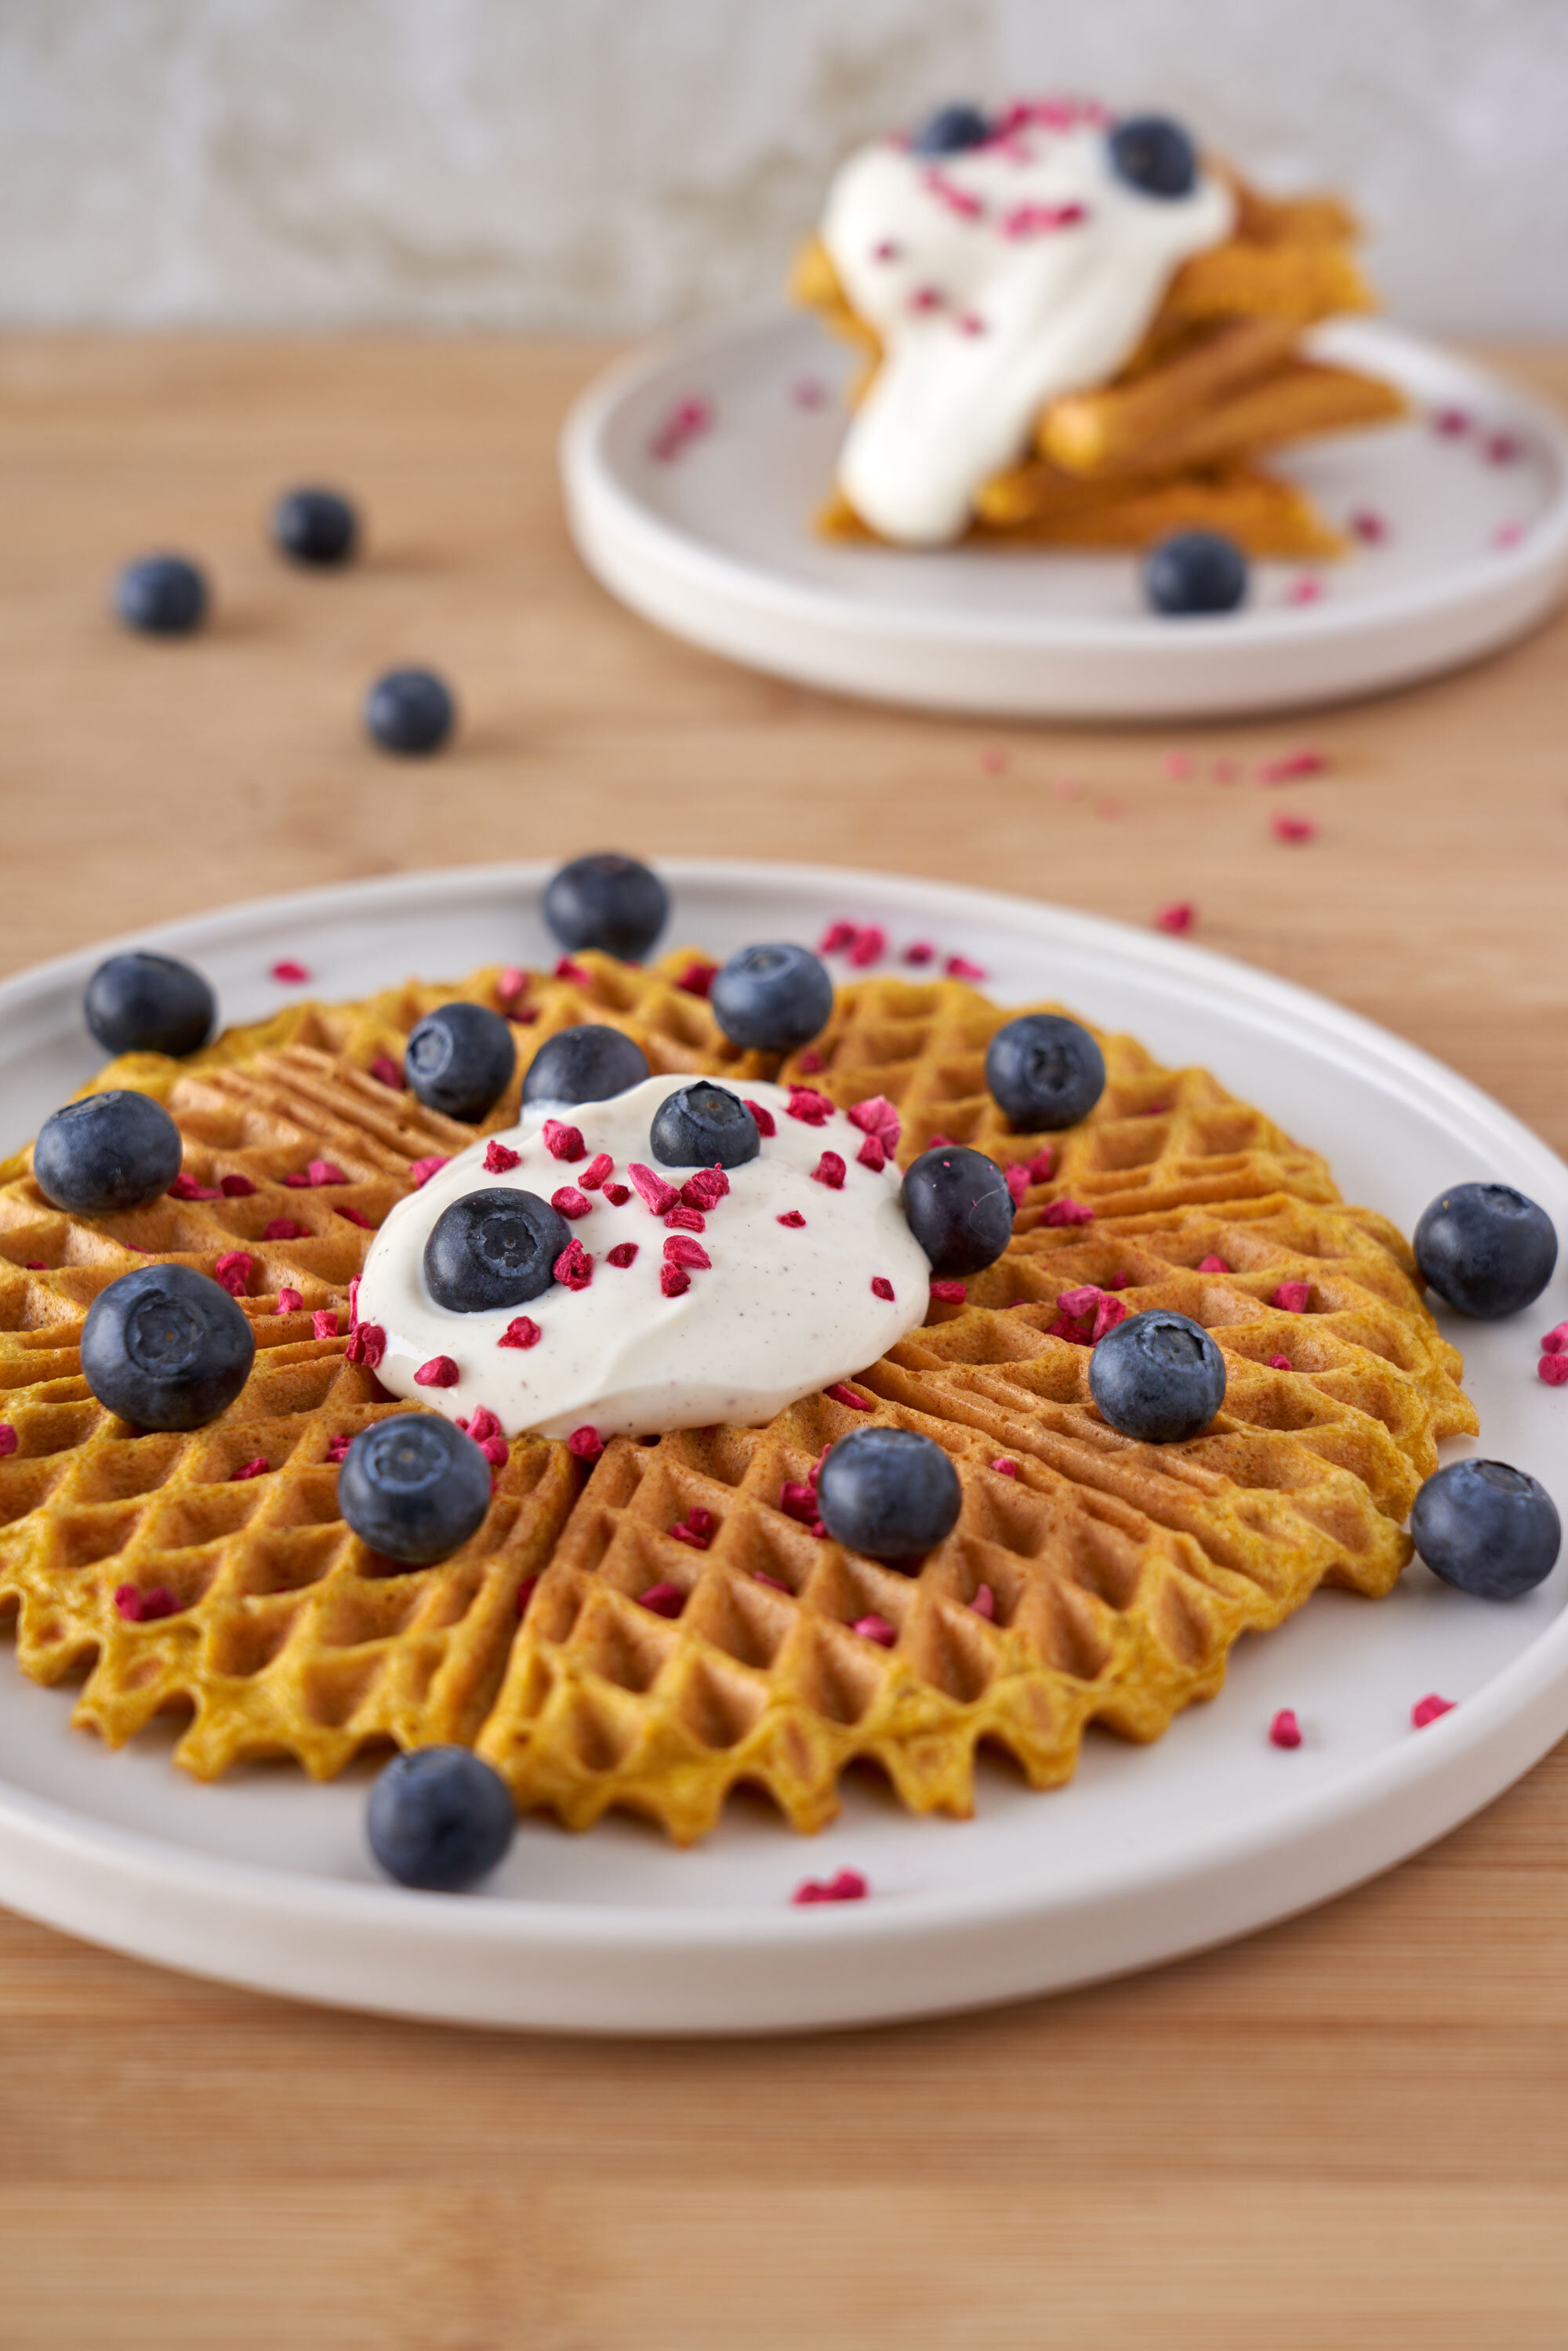 Waffle Ebook - Carrot Cake Waffle made with carrots, no sugar, no gluten | In Carina's Kitchen